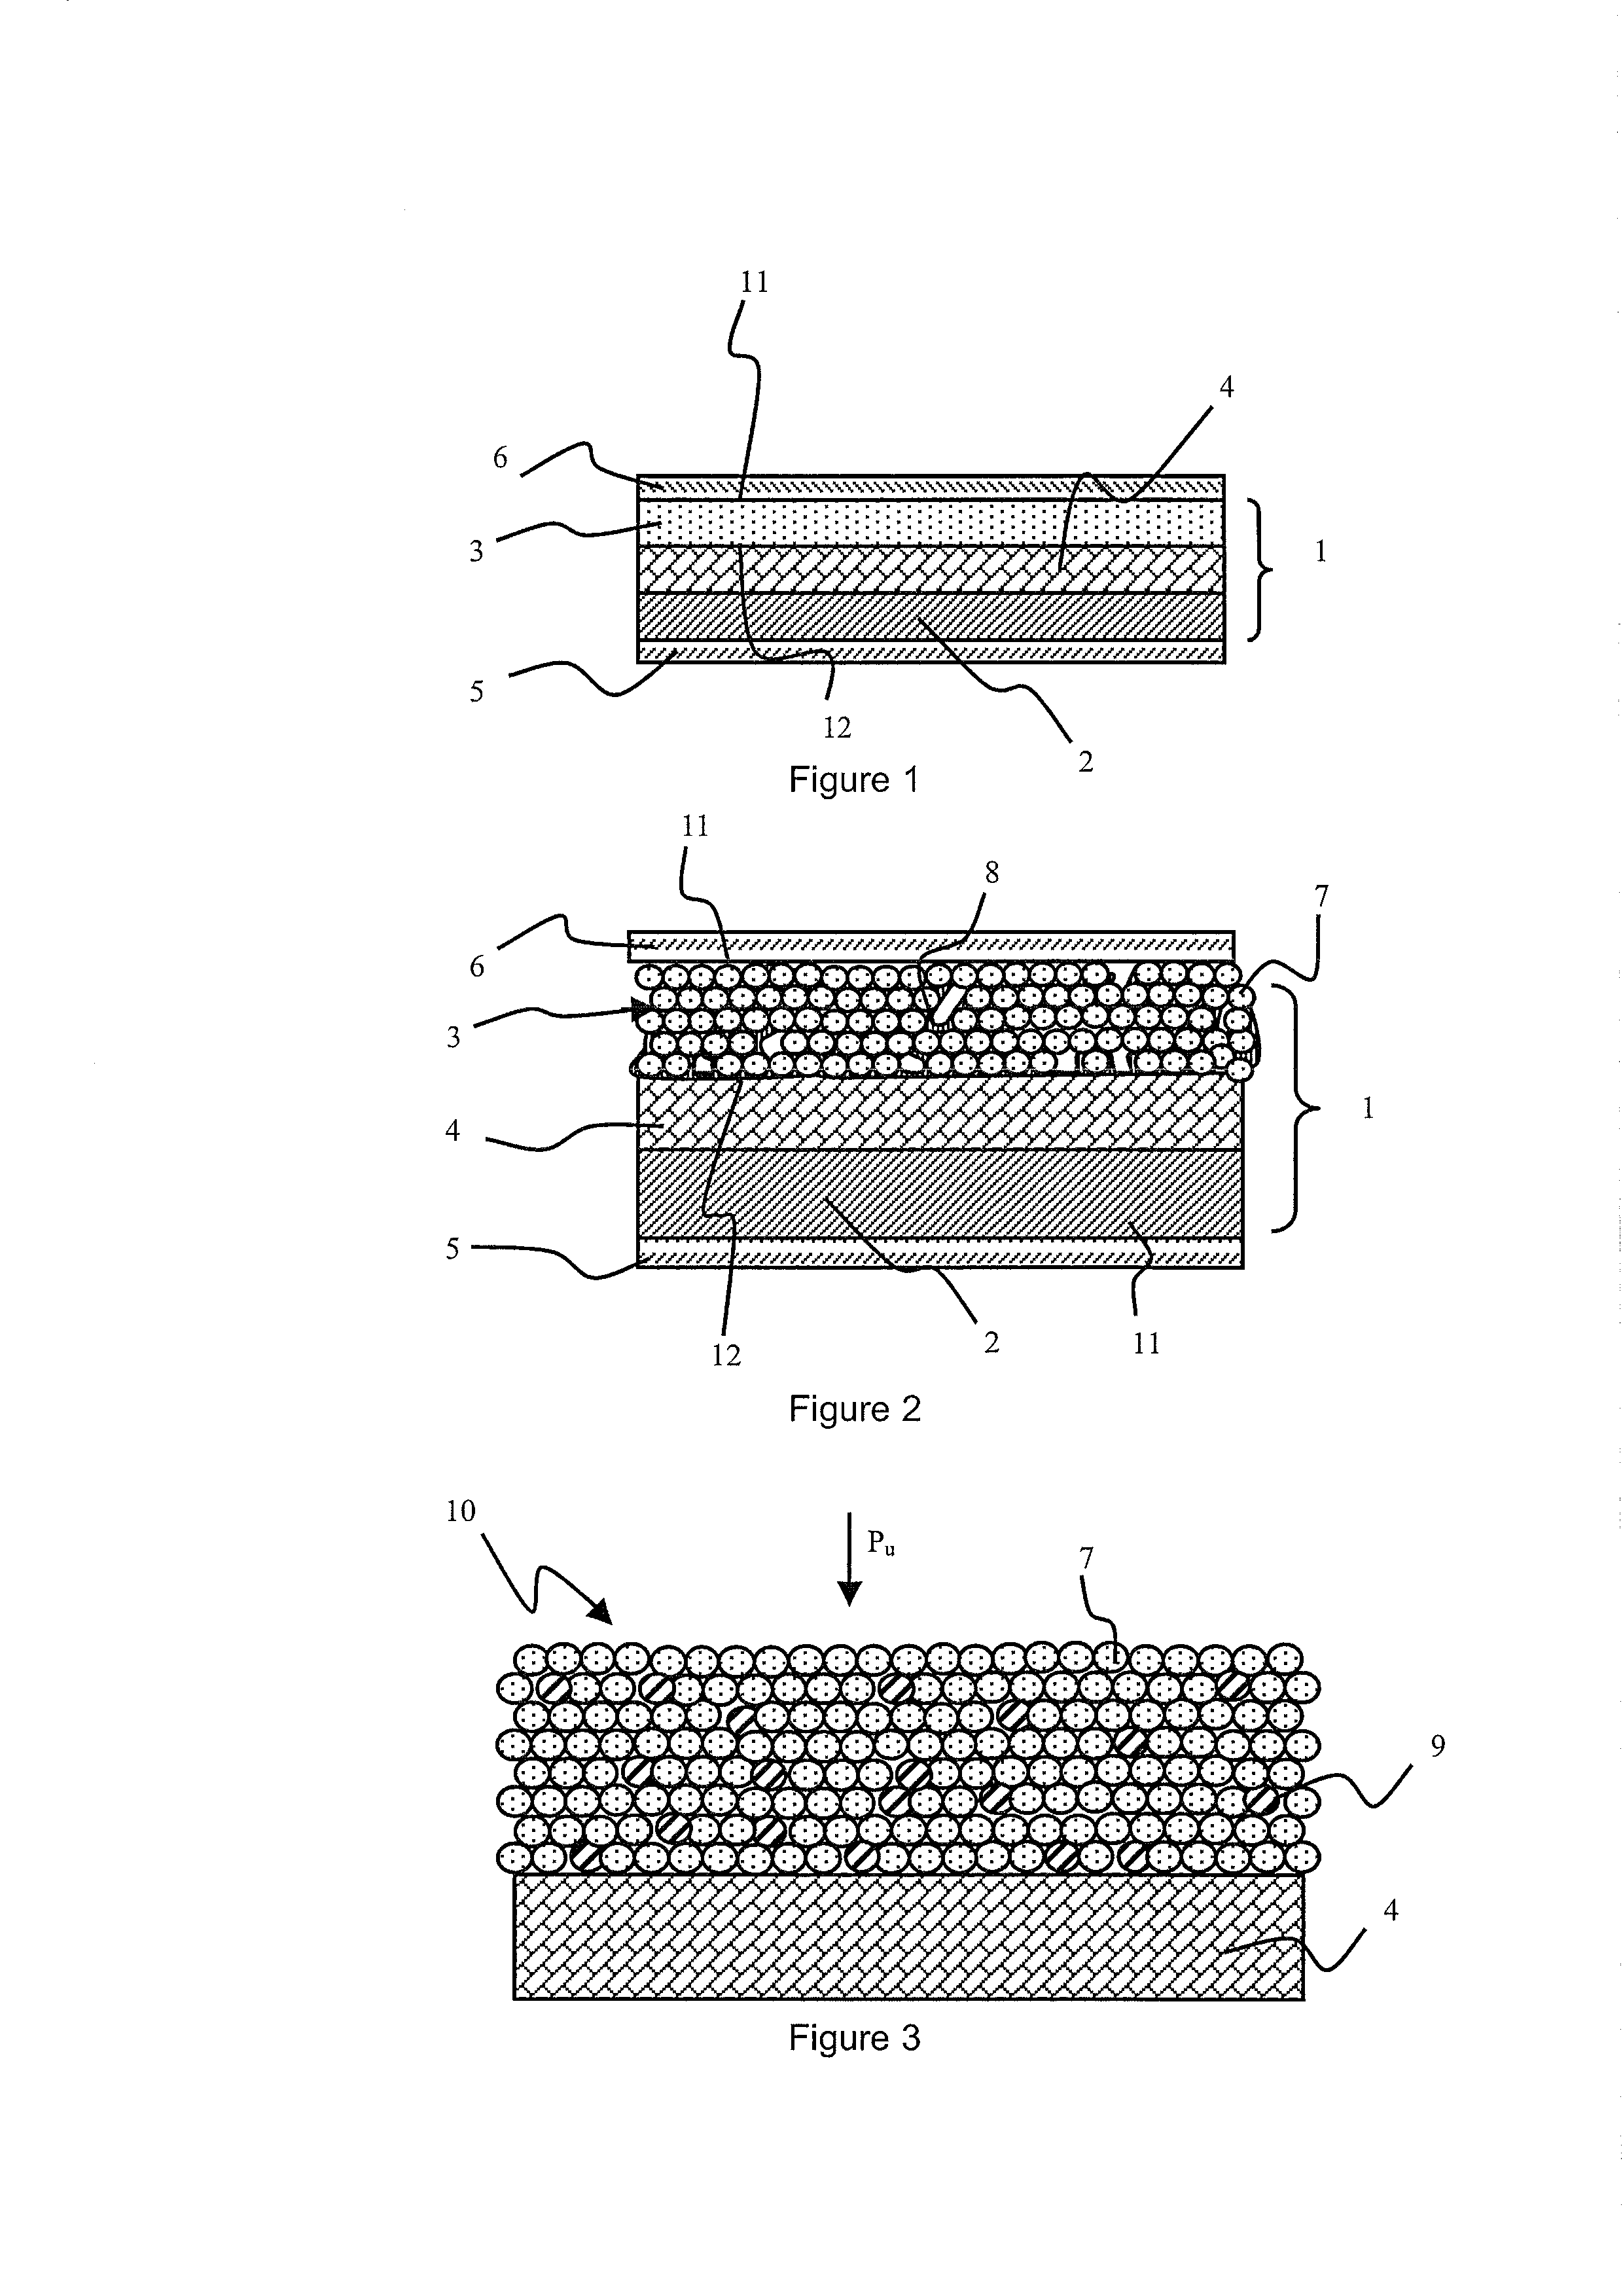 All-solid-state lithium battery, and production method therefor